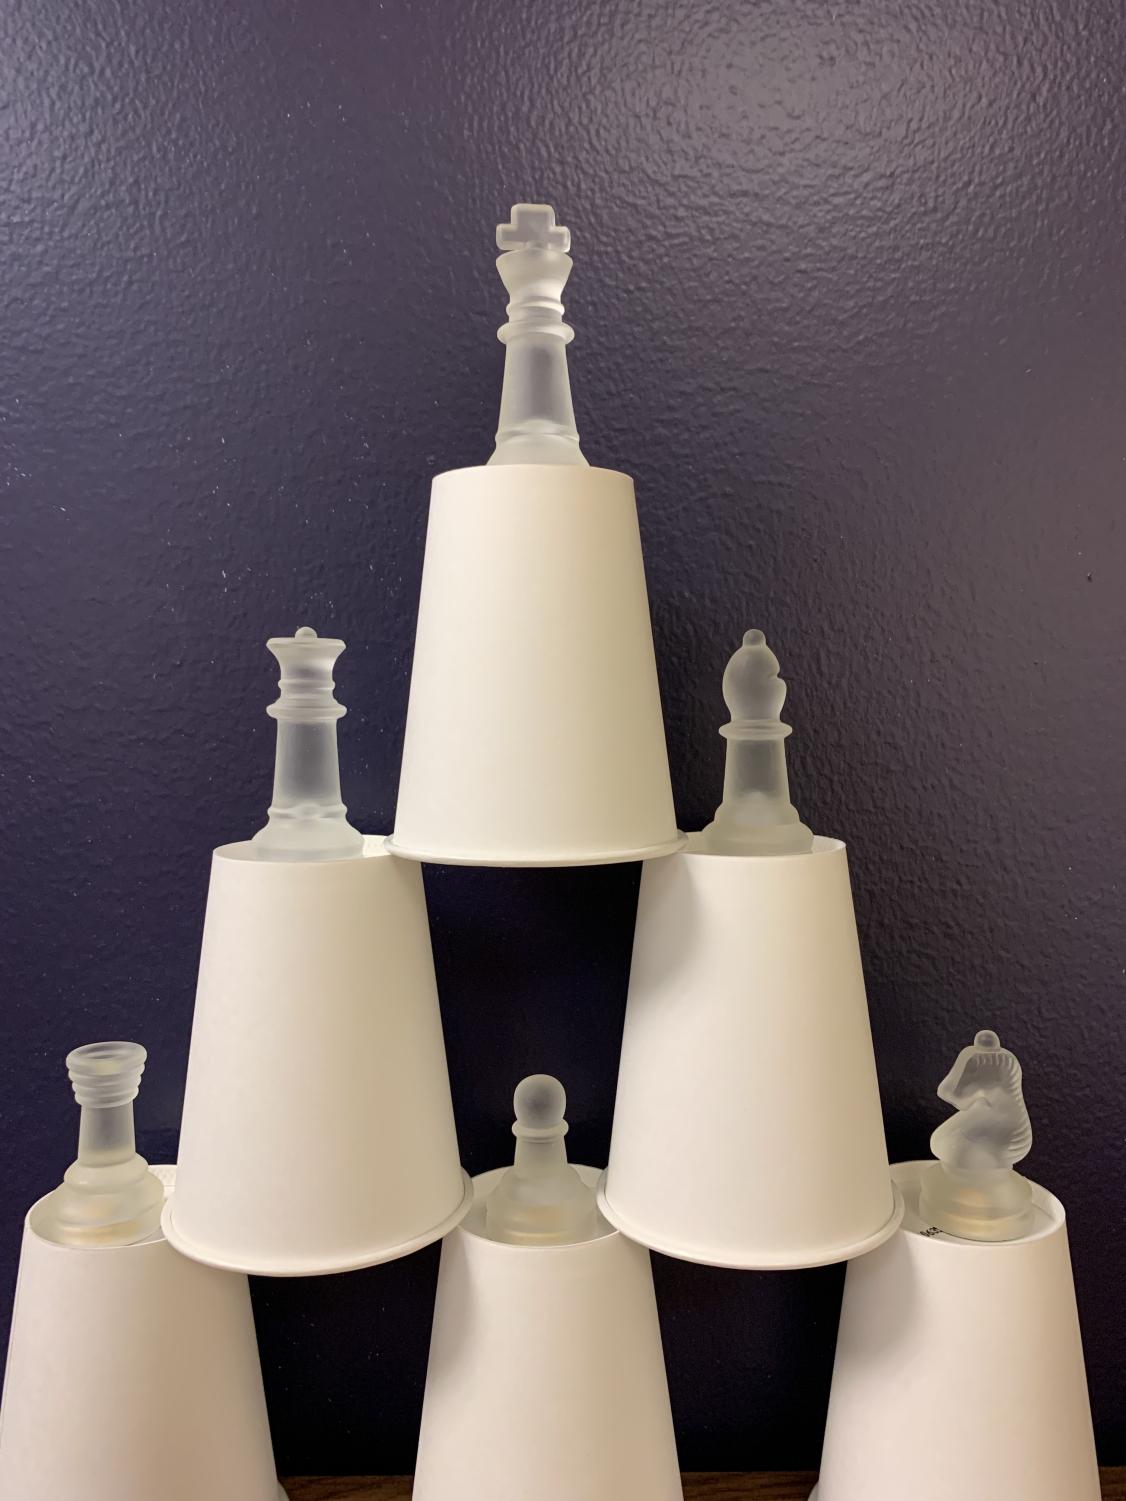 Chess pieces ranging in importance based on skill level. Just like how a leader builds off of their teammates, the king could not be at the top of the stack without the pawn at the base. 